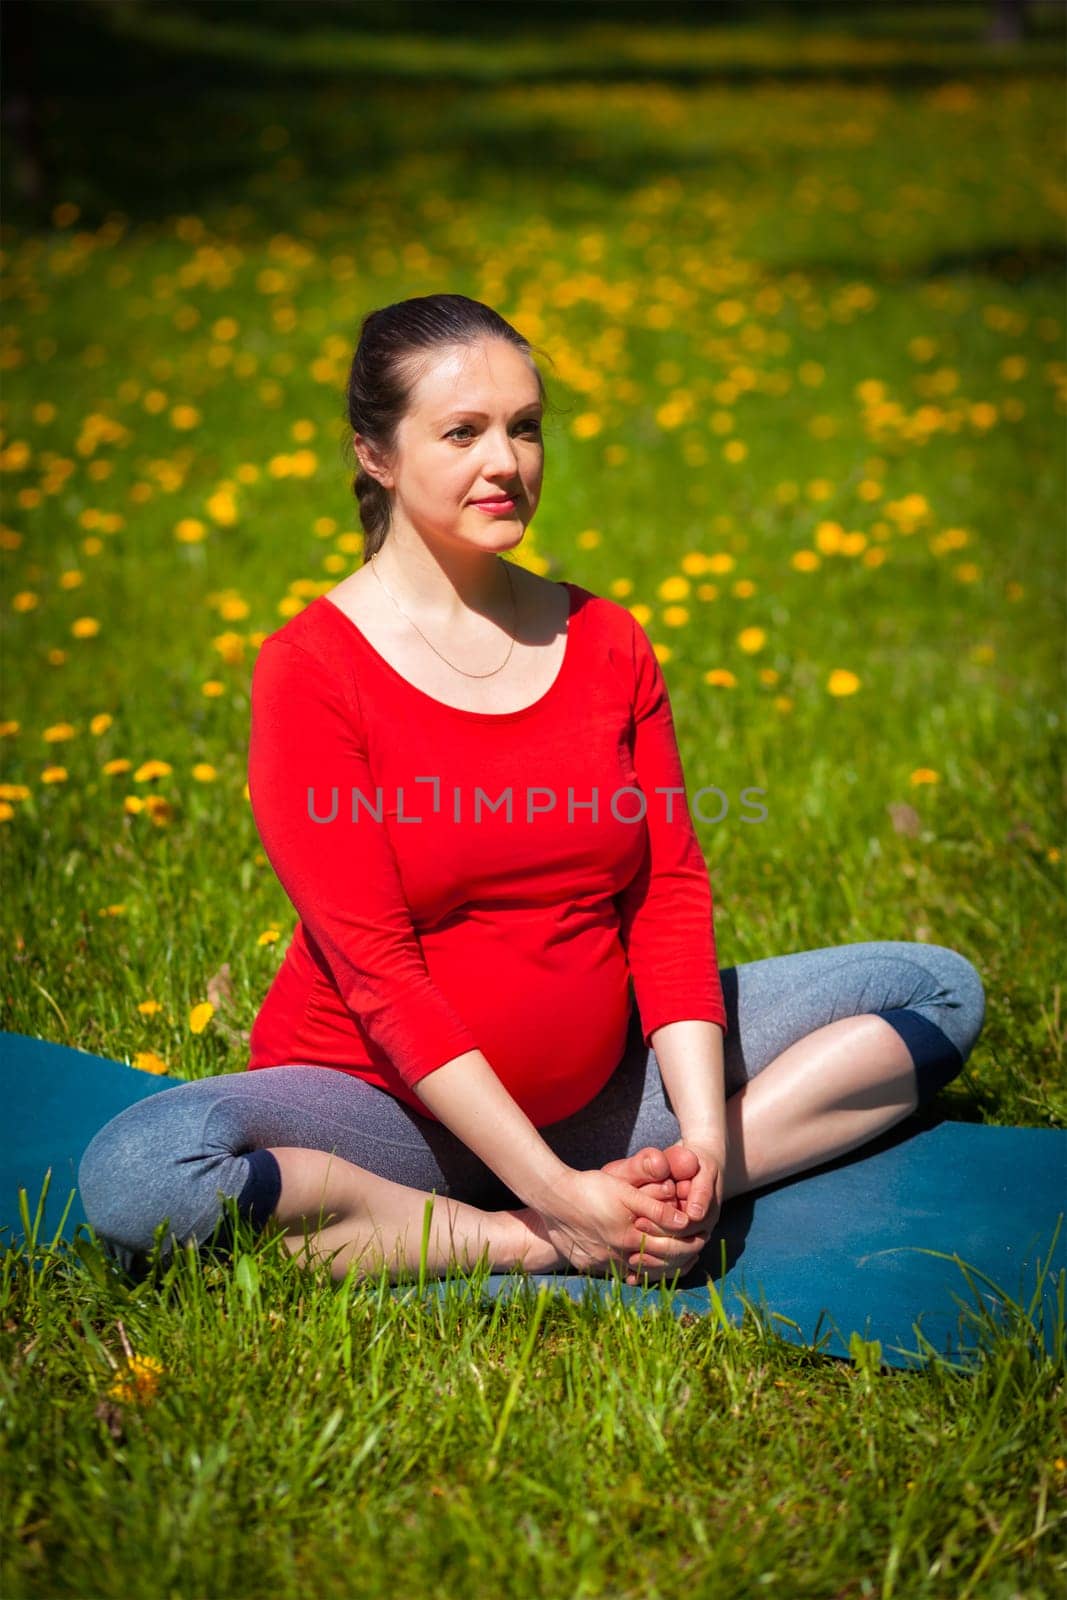 Pregnancy yoga exercise - pregnant woman doing asana baddha konasana bound angle pose outdoors on grass lawn with dandelions in summer